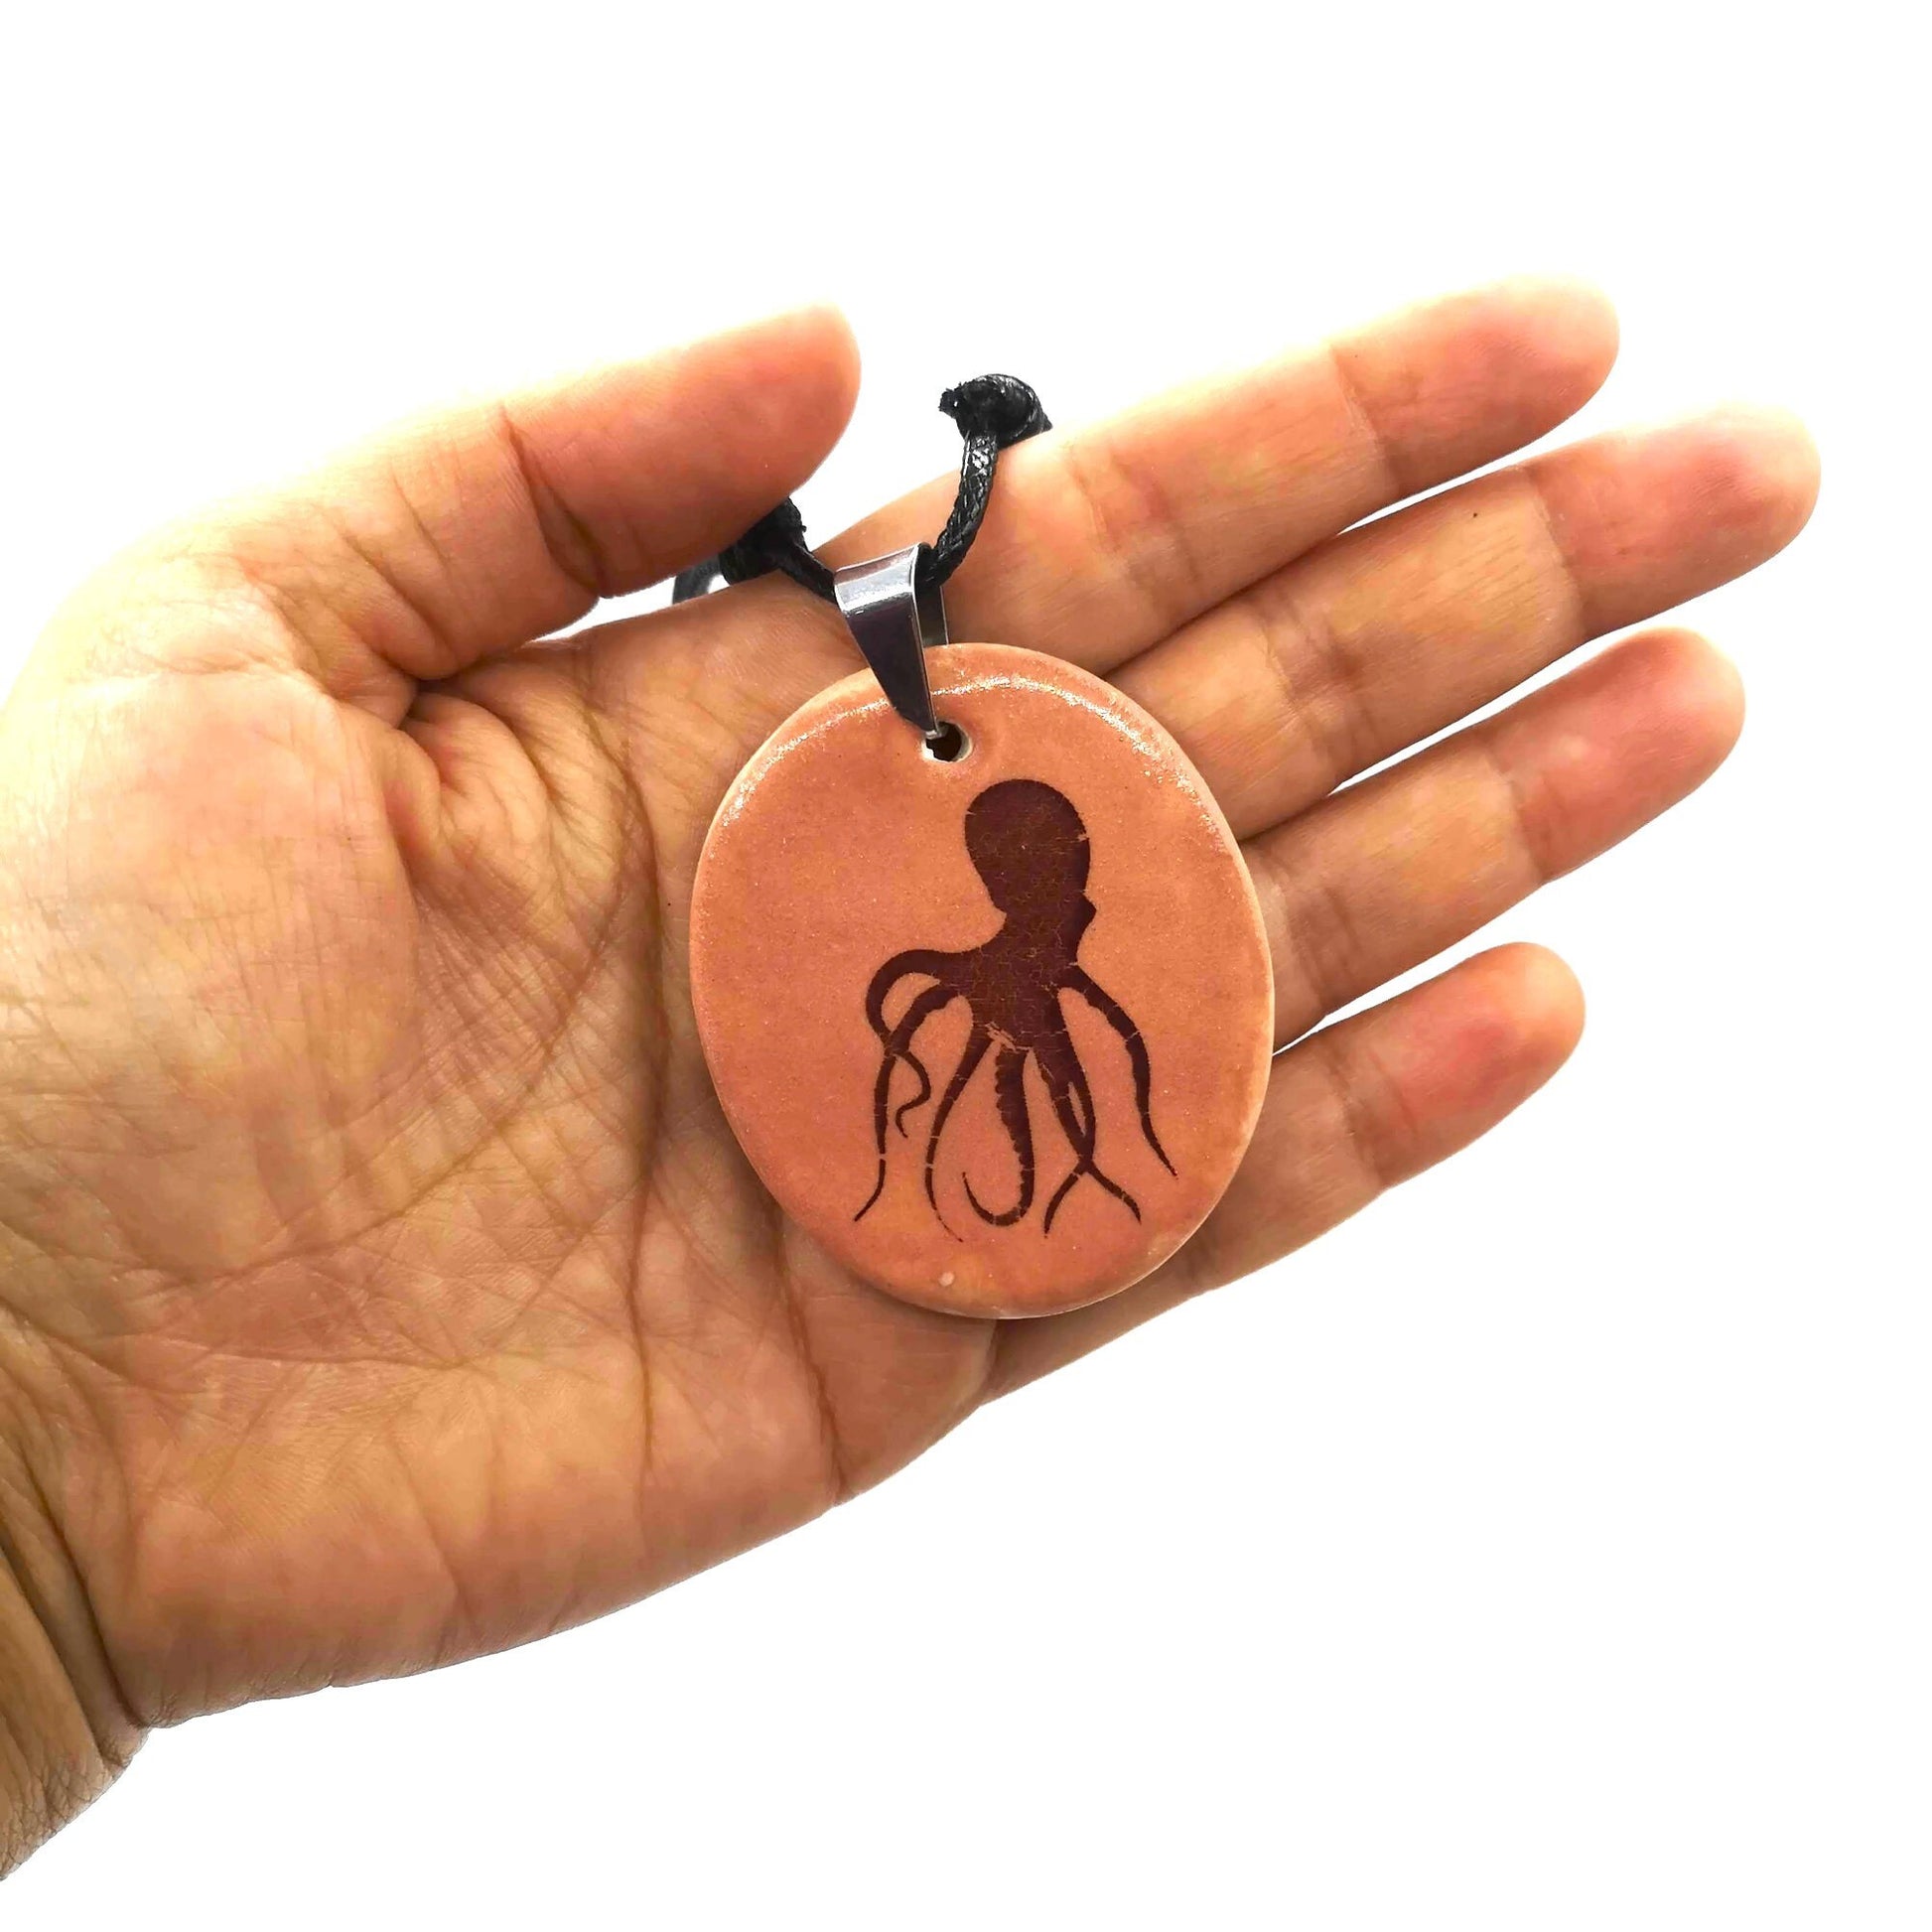 Handmade Ceramic Octopus Necklace Pendant For Woman, Hand Painted pink Necklace For Her, Artisan Jewelry Birthday Gift Idea W/ Gift Box - Ceramica Ana Rafael